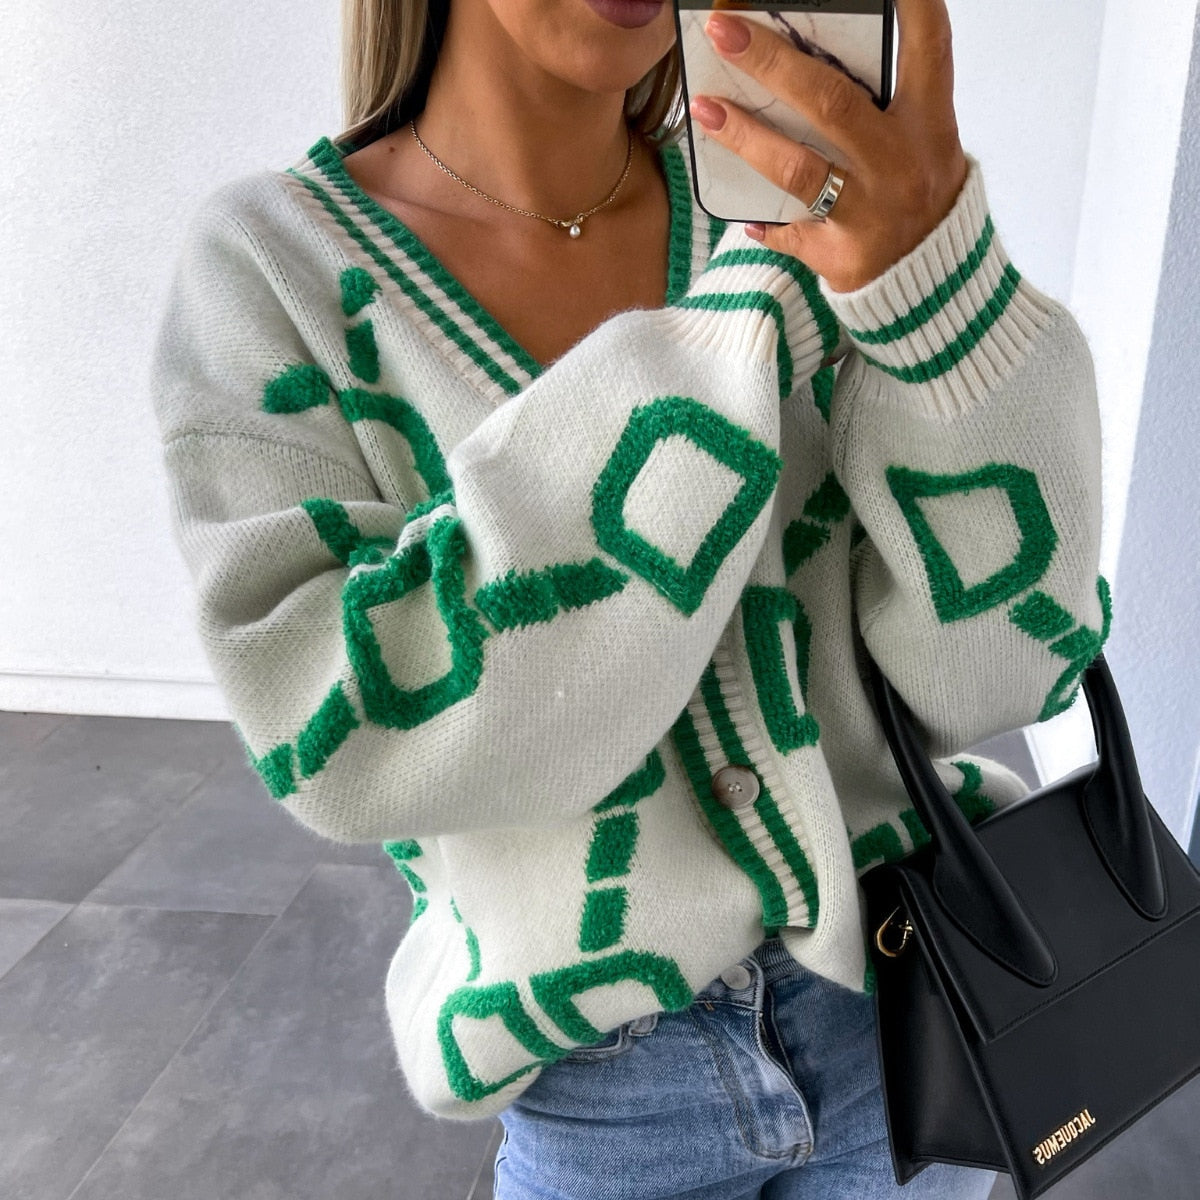 Cryptographic Autumn Winter Knitted Button Up Loose Cardigan Sweater Women Long Sleeve Tops Oversized Sweaters Warm Sueters Coat